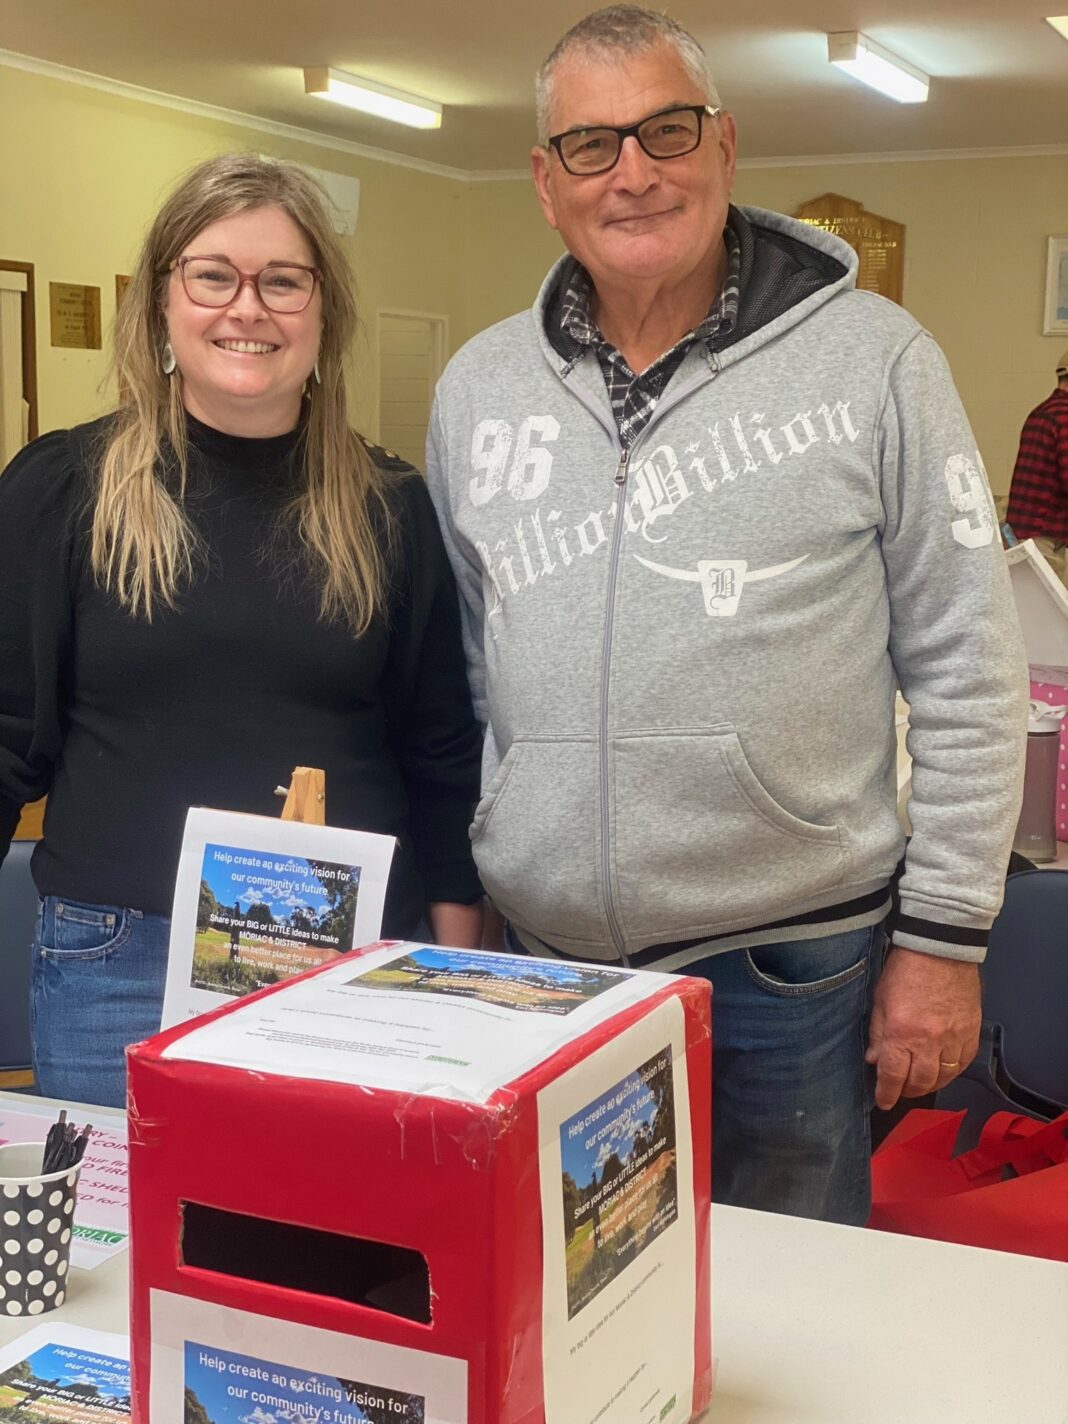 Moriac Community Network Members Kim Rowe and Evan Belfrage collecting community surveys at Moriac market on 8 May 2023